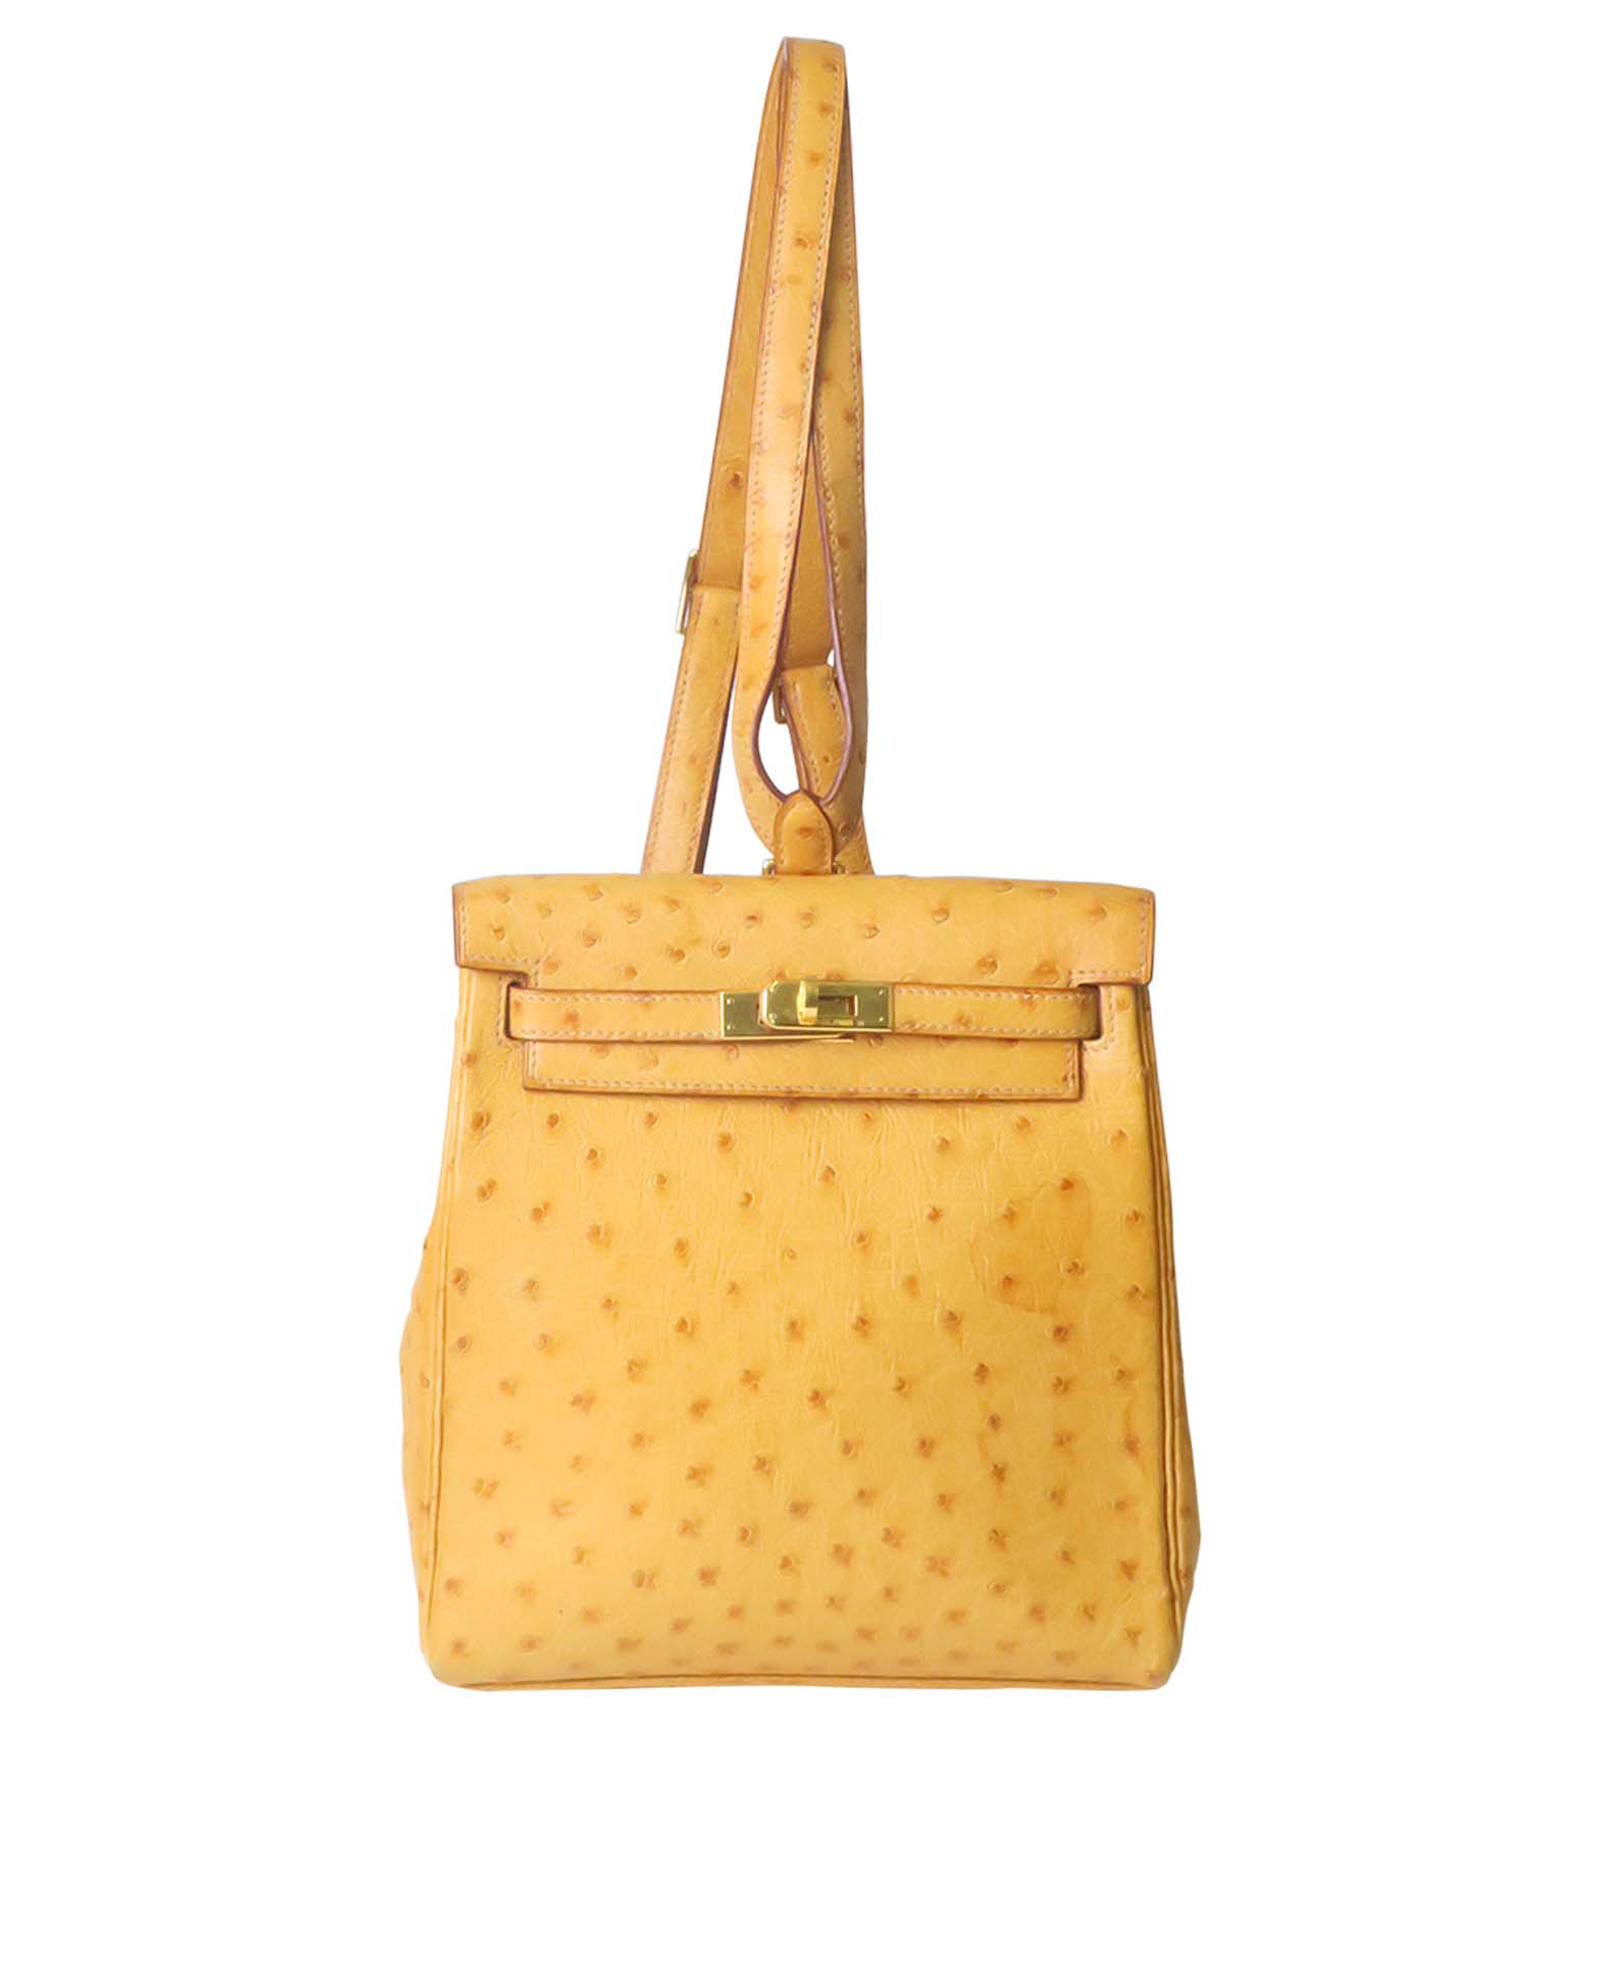 SOLD OUT——— Hermes Kelly A Dos PM in ostrich On website search for